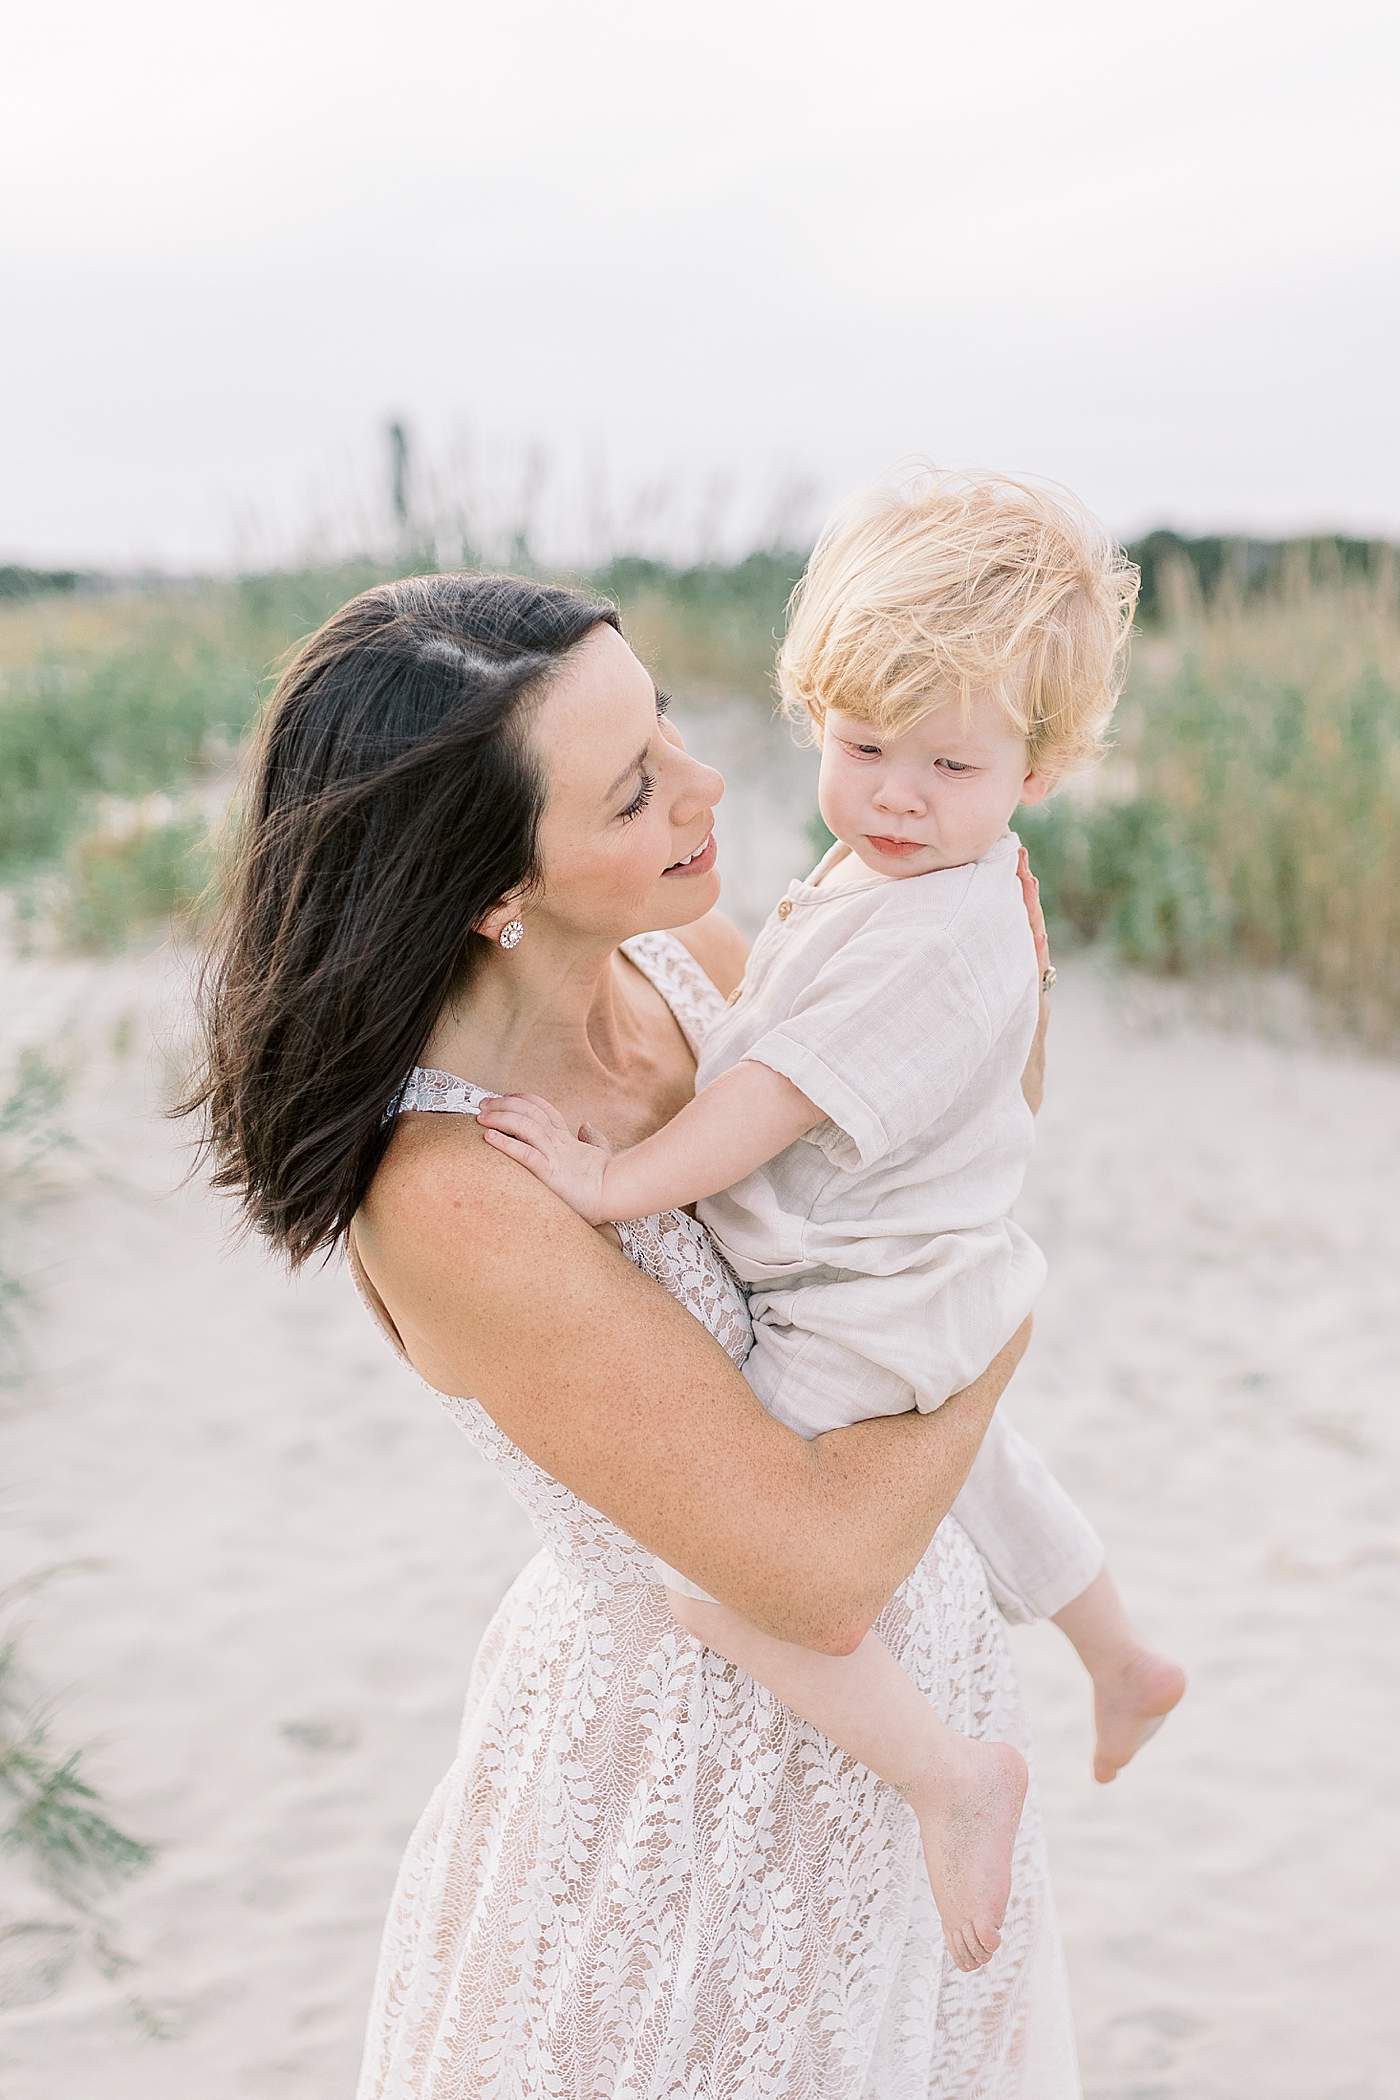 Mom holding her baby boy on the beach | Photo by Caitlyn Motycka Photography